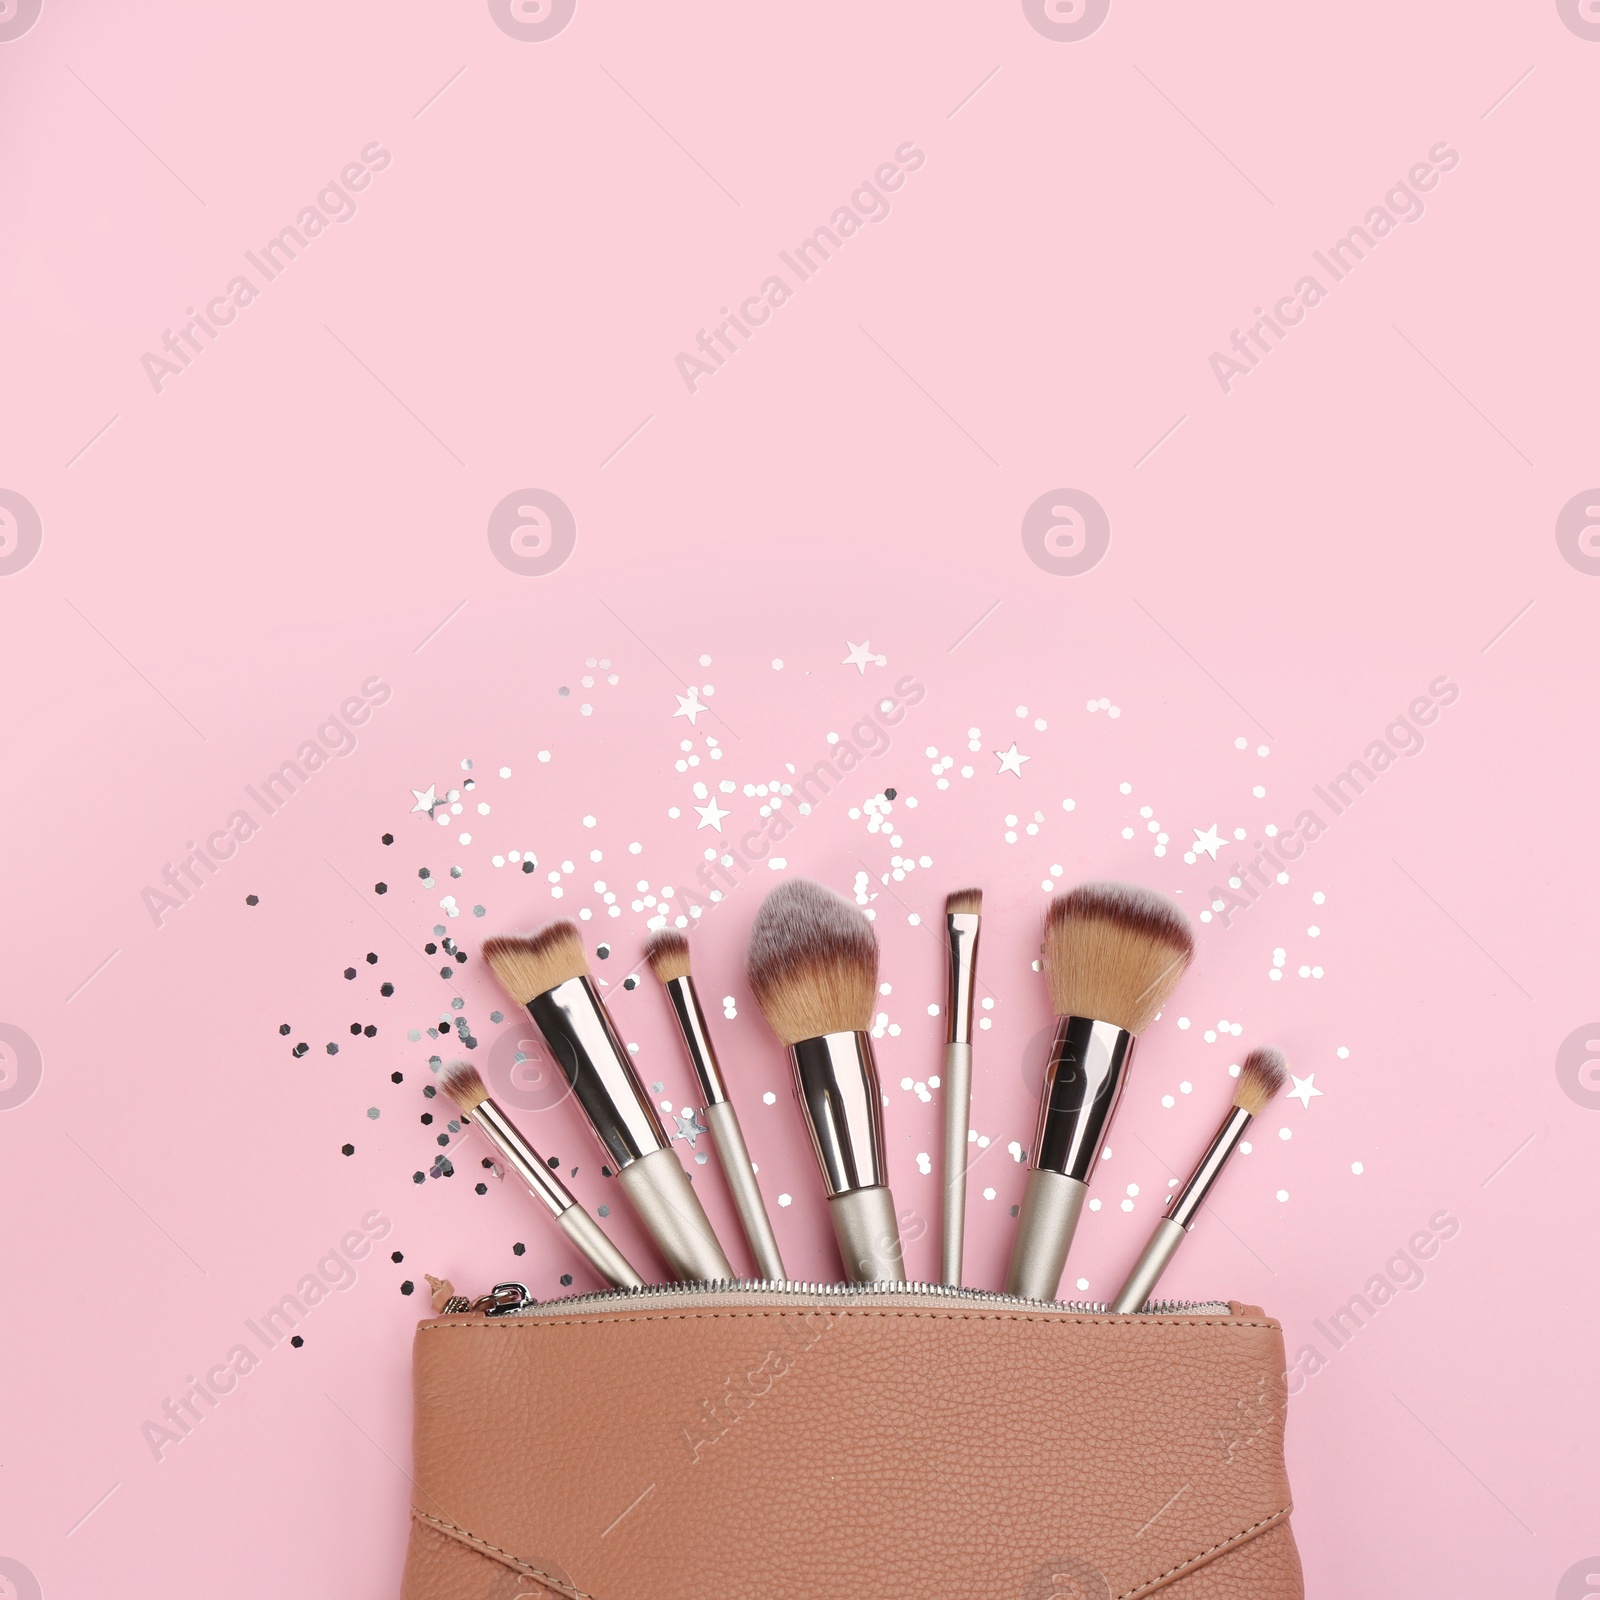 Photo of Different makeup brushes, case and shiny confetti on pink background, flat lay